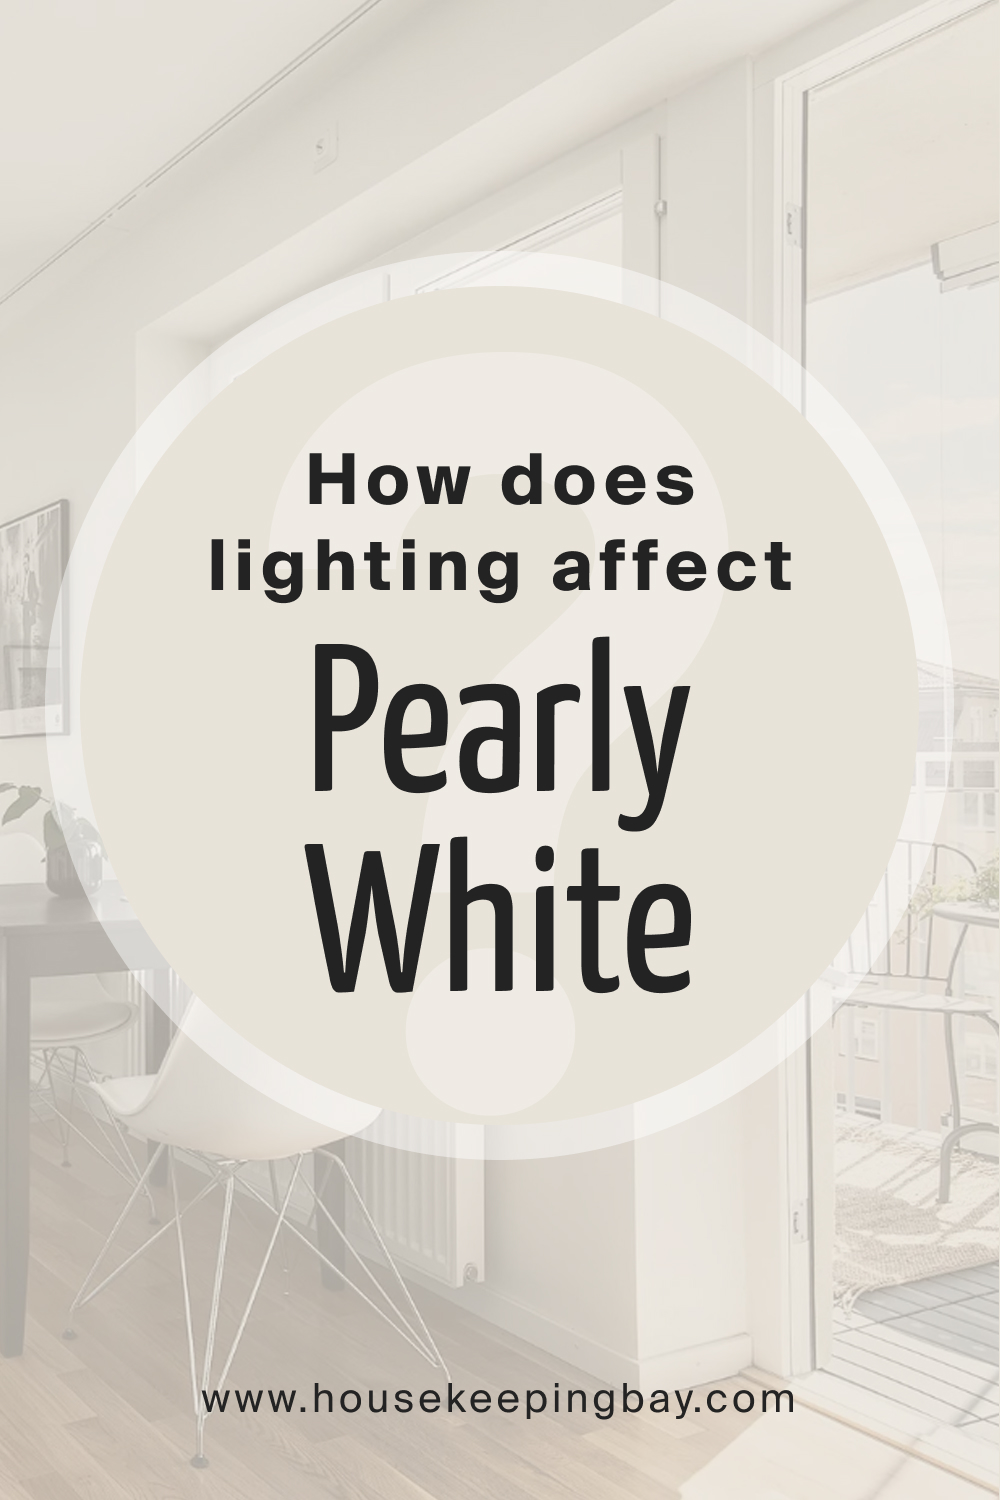 How does lighting affect SW Pearly White